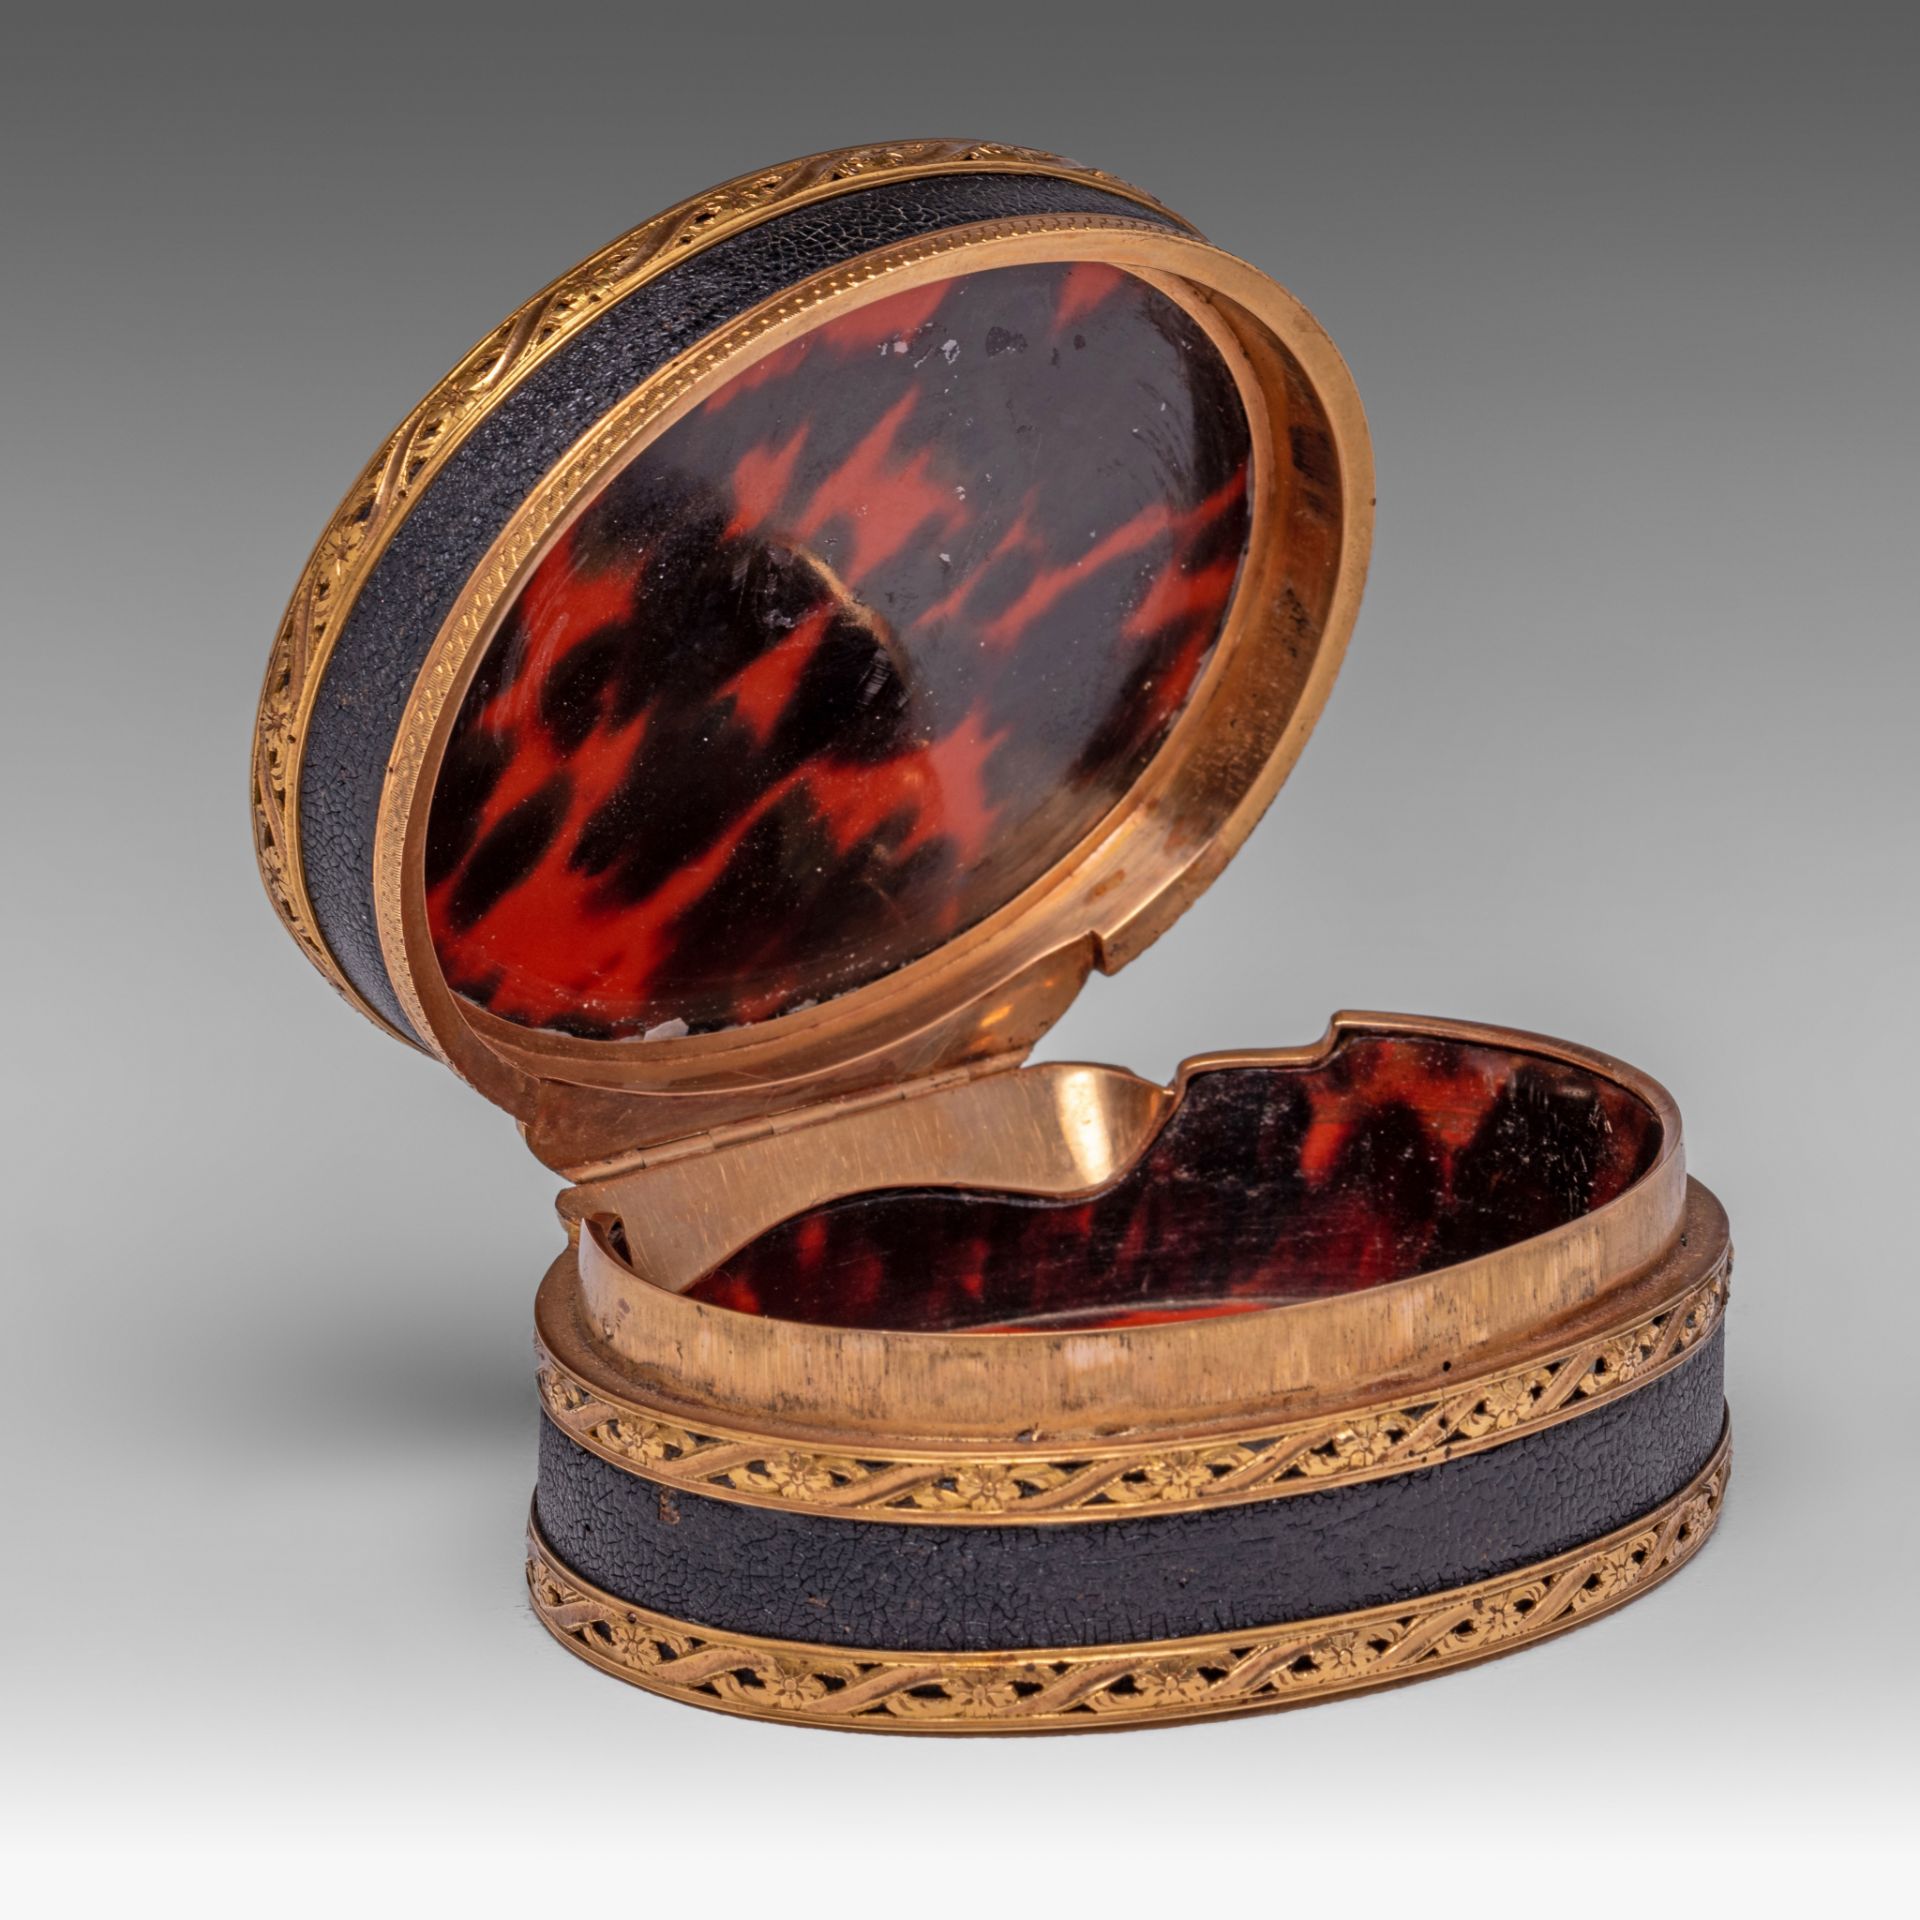 A fine Louis XVI leather and gold snuffbox, the inside with tortoiseshell, late 18thC, H 3,5 cm - Image 2 of 7